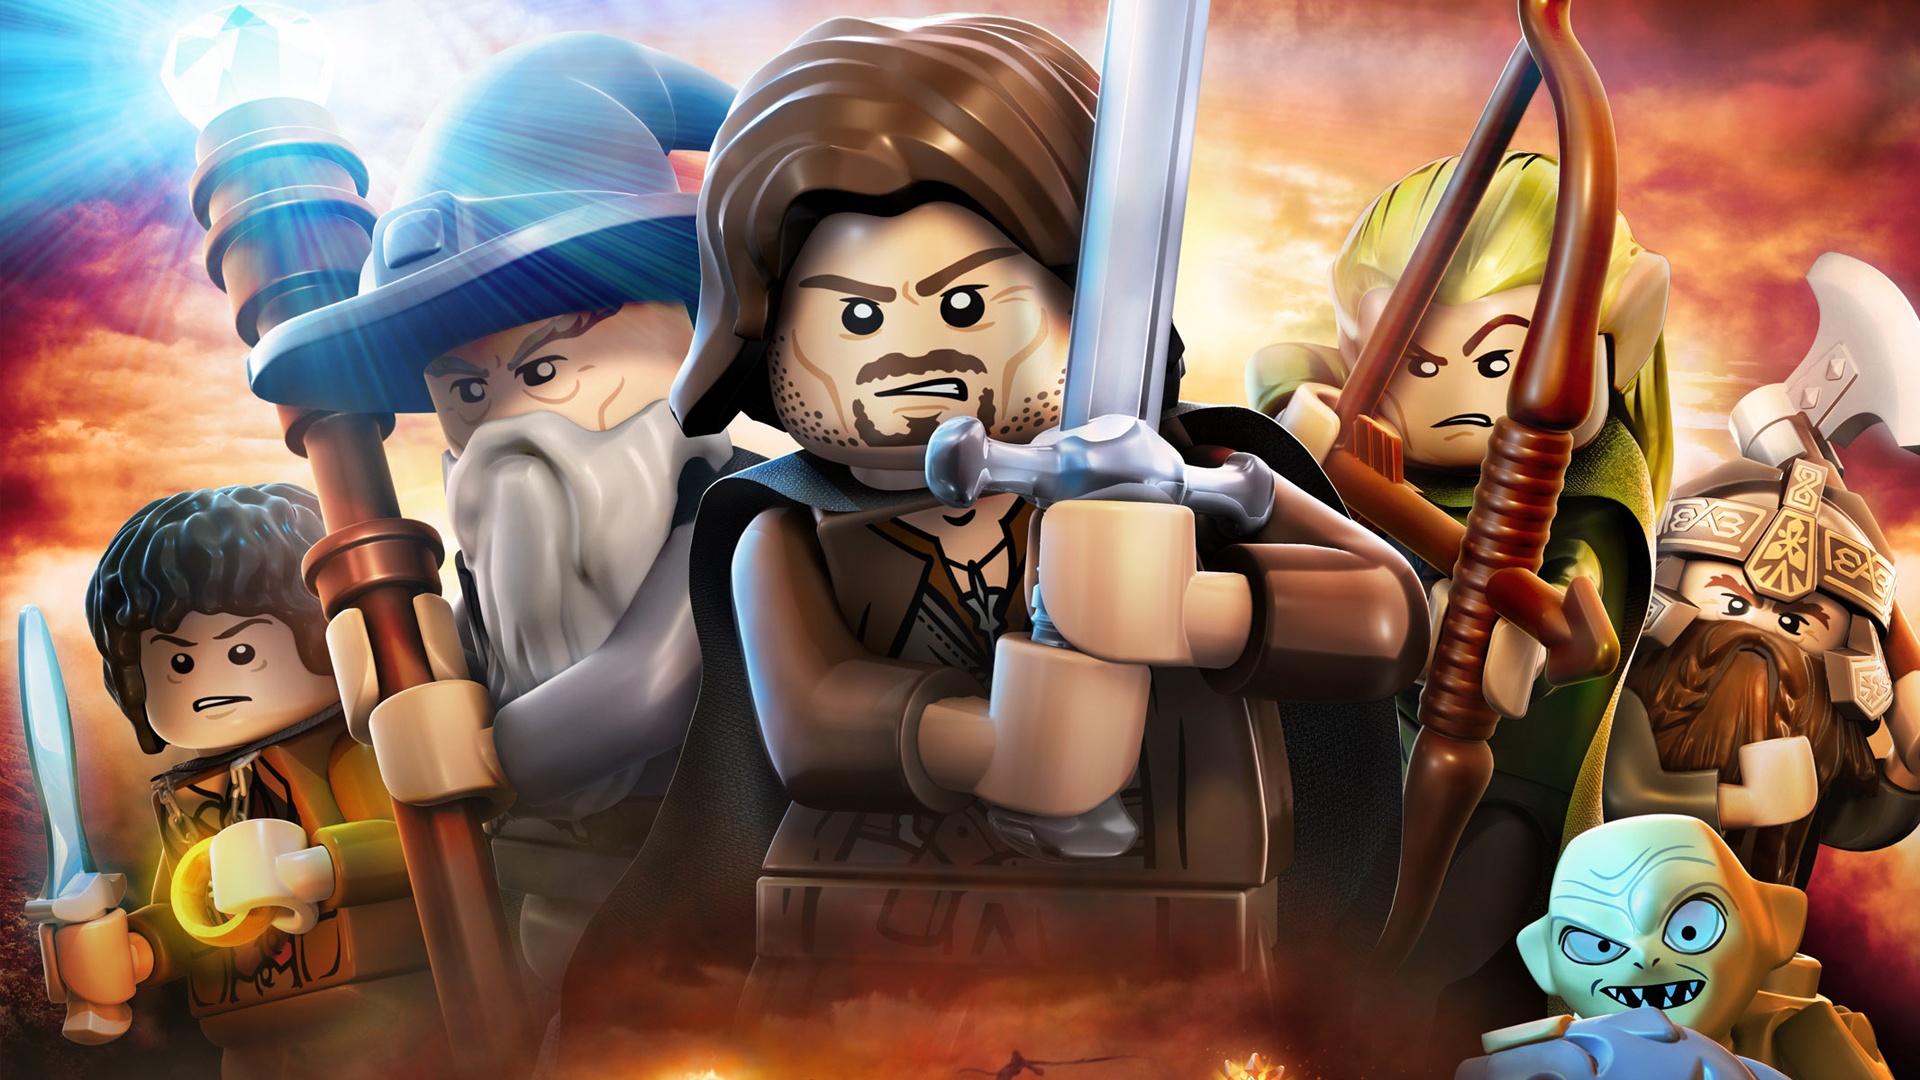 Video Game LEGO The Lord of the Rings HD Wallpaper